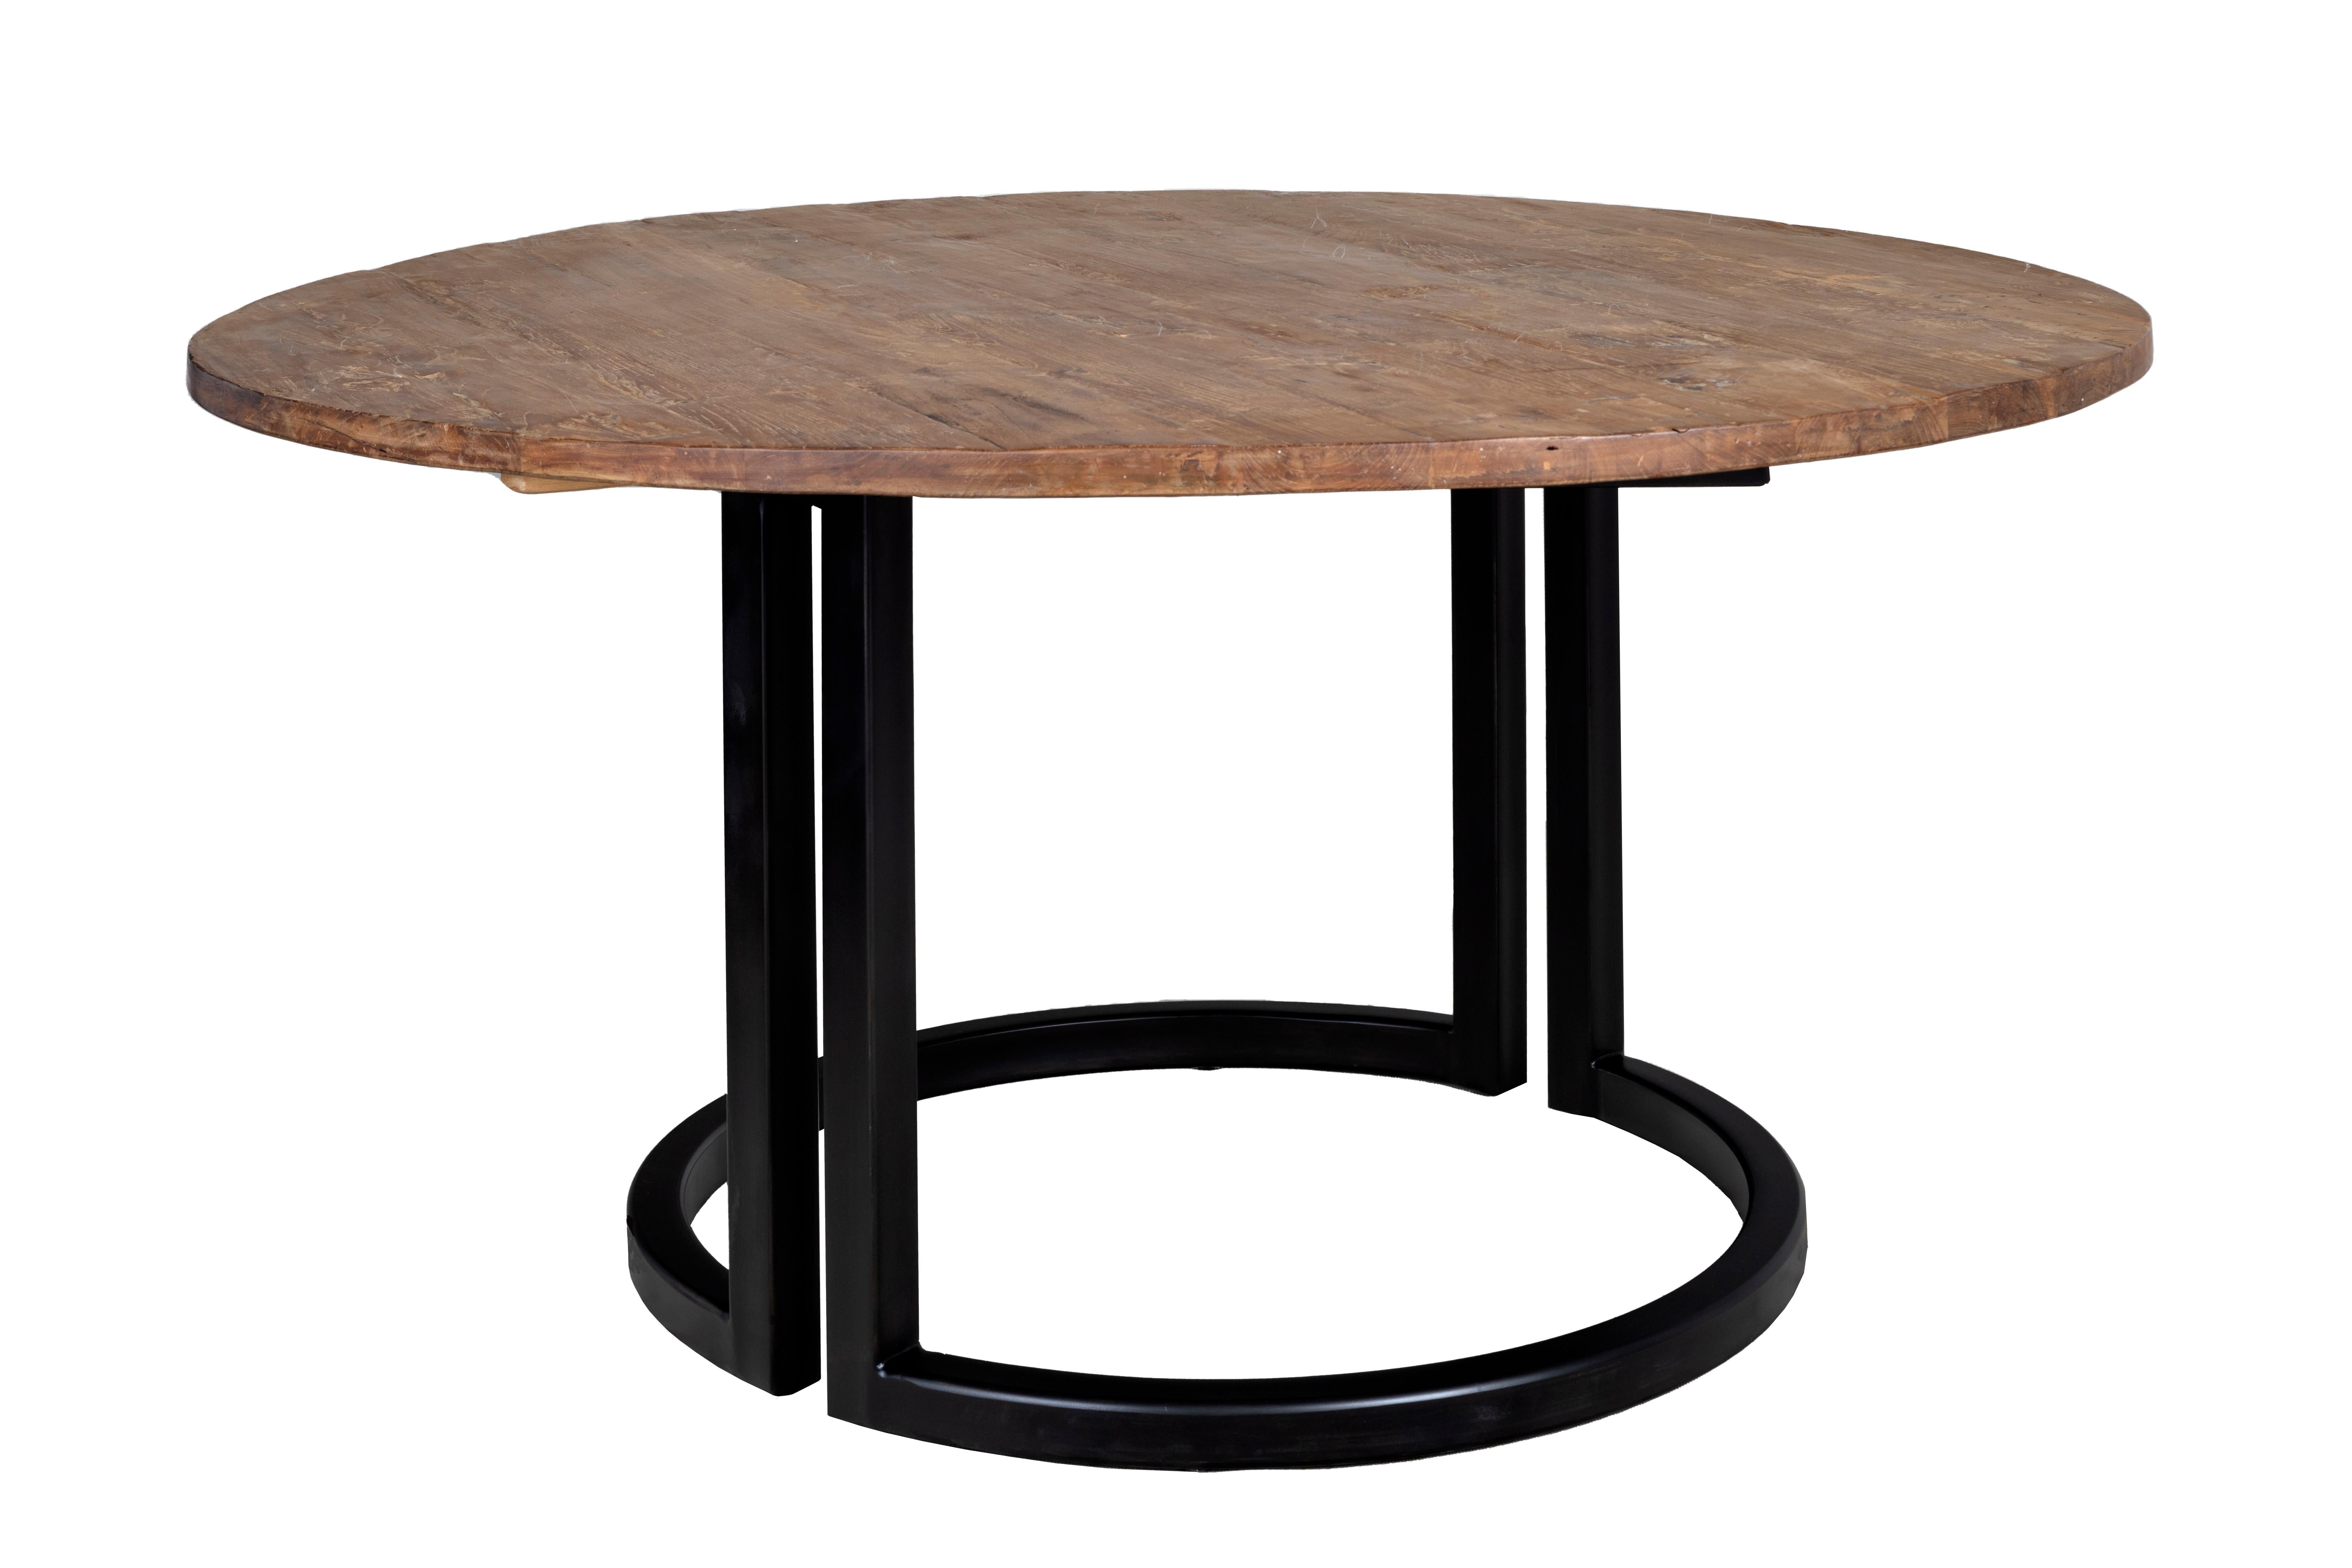 Inspired by the desire to elevate found objects and traditional designs, the Le Monde collection takes a modern approach to historic design. The one-of-a-kind table top is constructed from reclaimed elm wood with an ebonized steel base and features